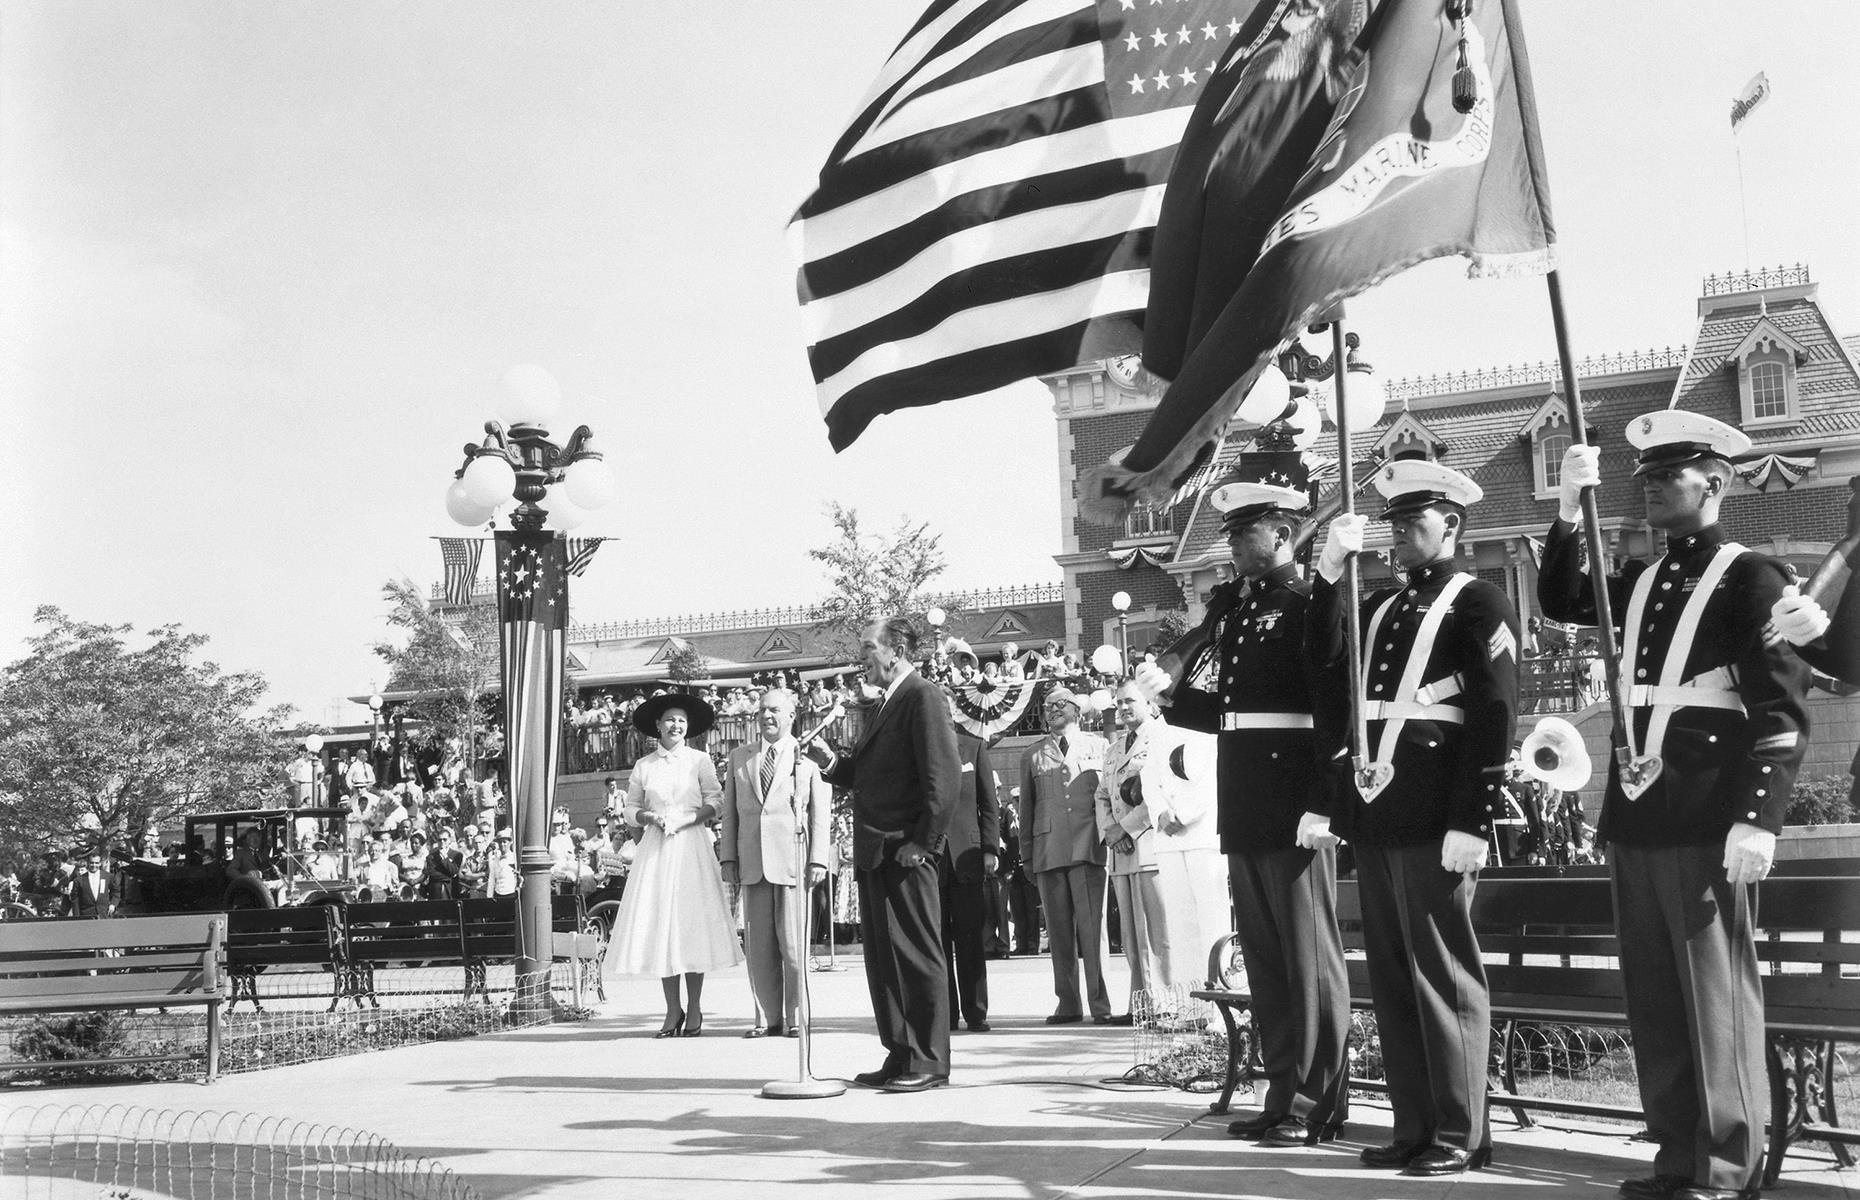 Soon, Walt Disney's dream was manifest. Disneyland (now Disneyland Park) in Anaheim, Orange County threw open its gates to select guests on Sunday 17 July 1955, and scores of Americans gathered around their TV sets to watch Disney give his dedication speech (pictured). The words Disney spoke that day have remained famous: "To all who come to this happy place – welcome. Disney is your land."